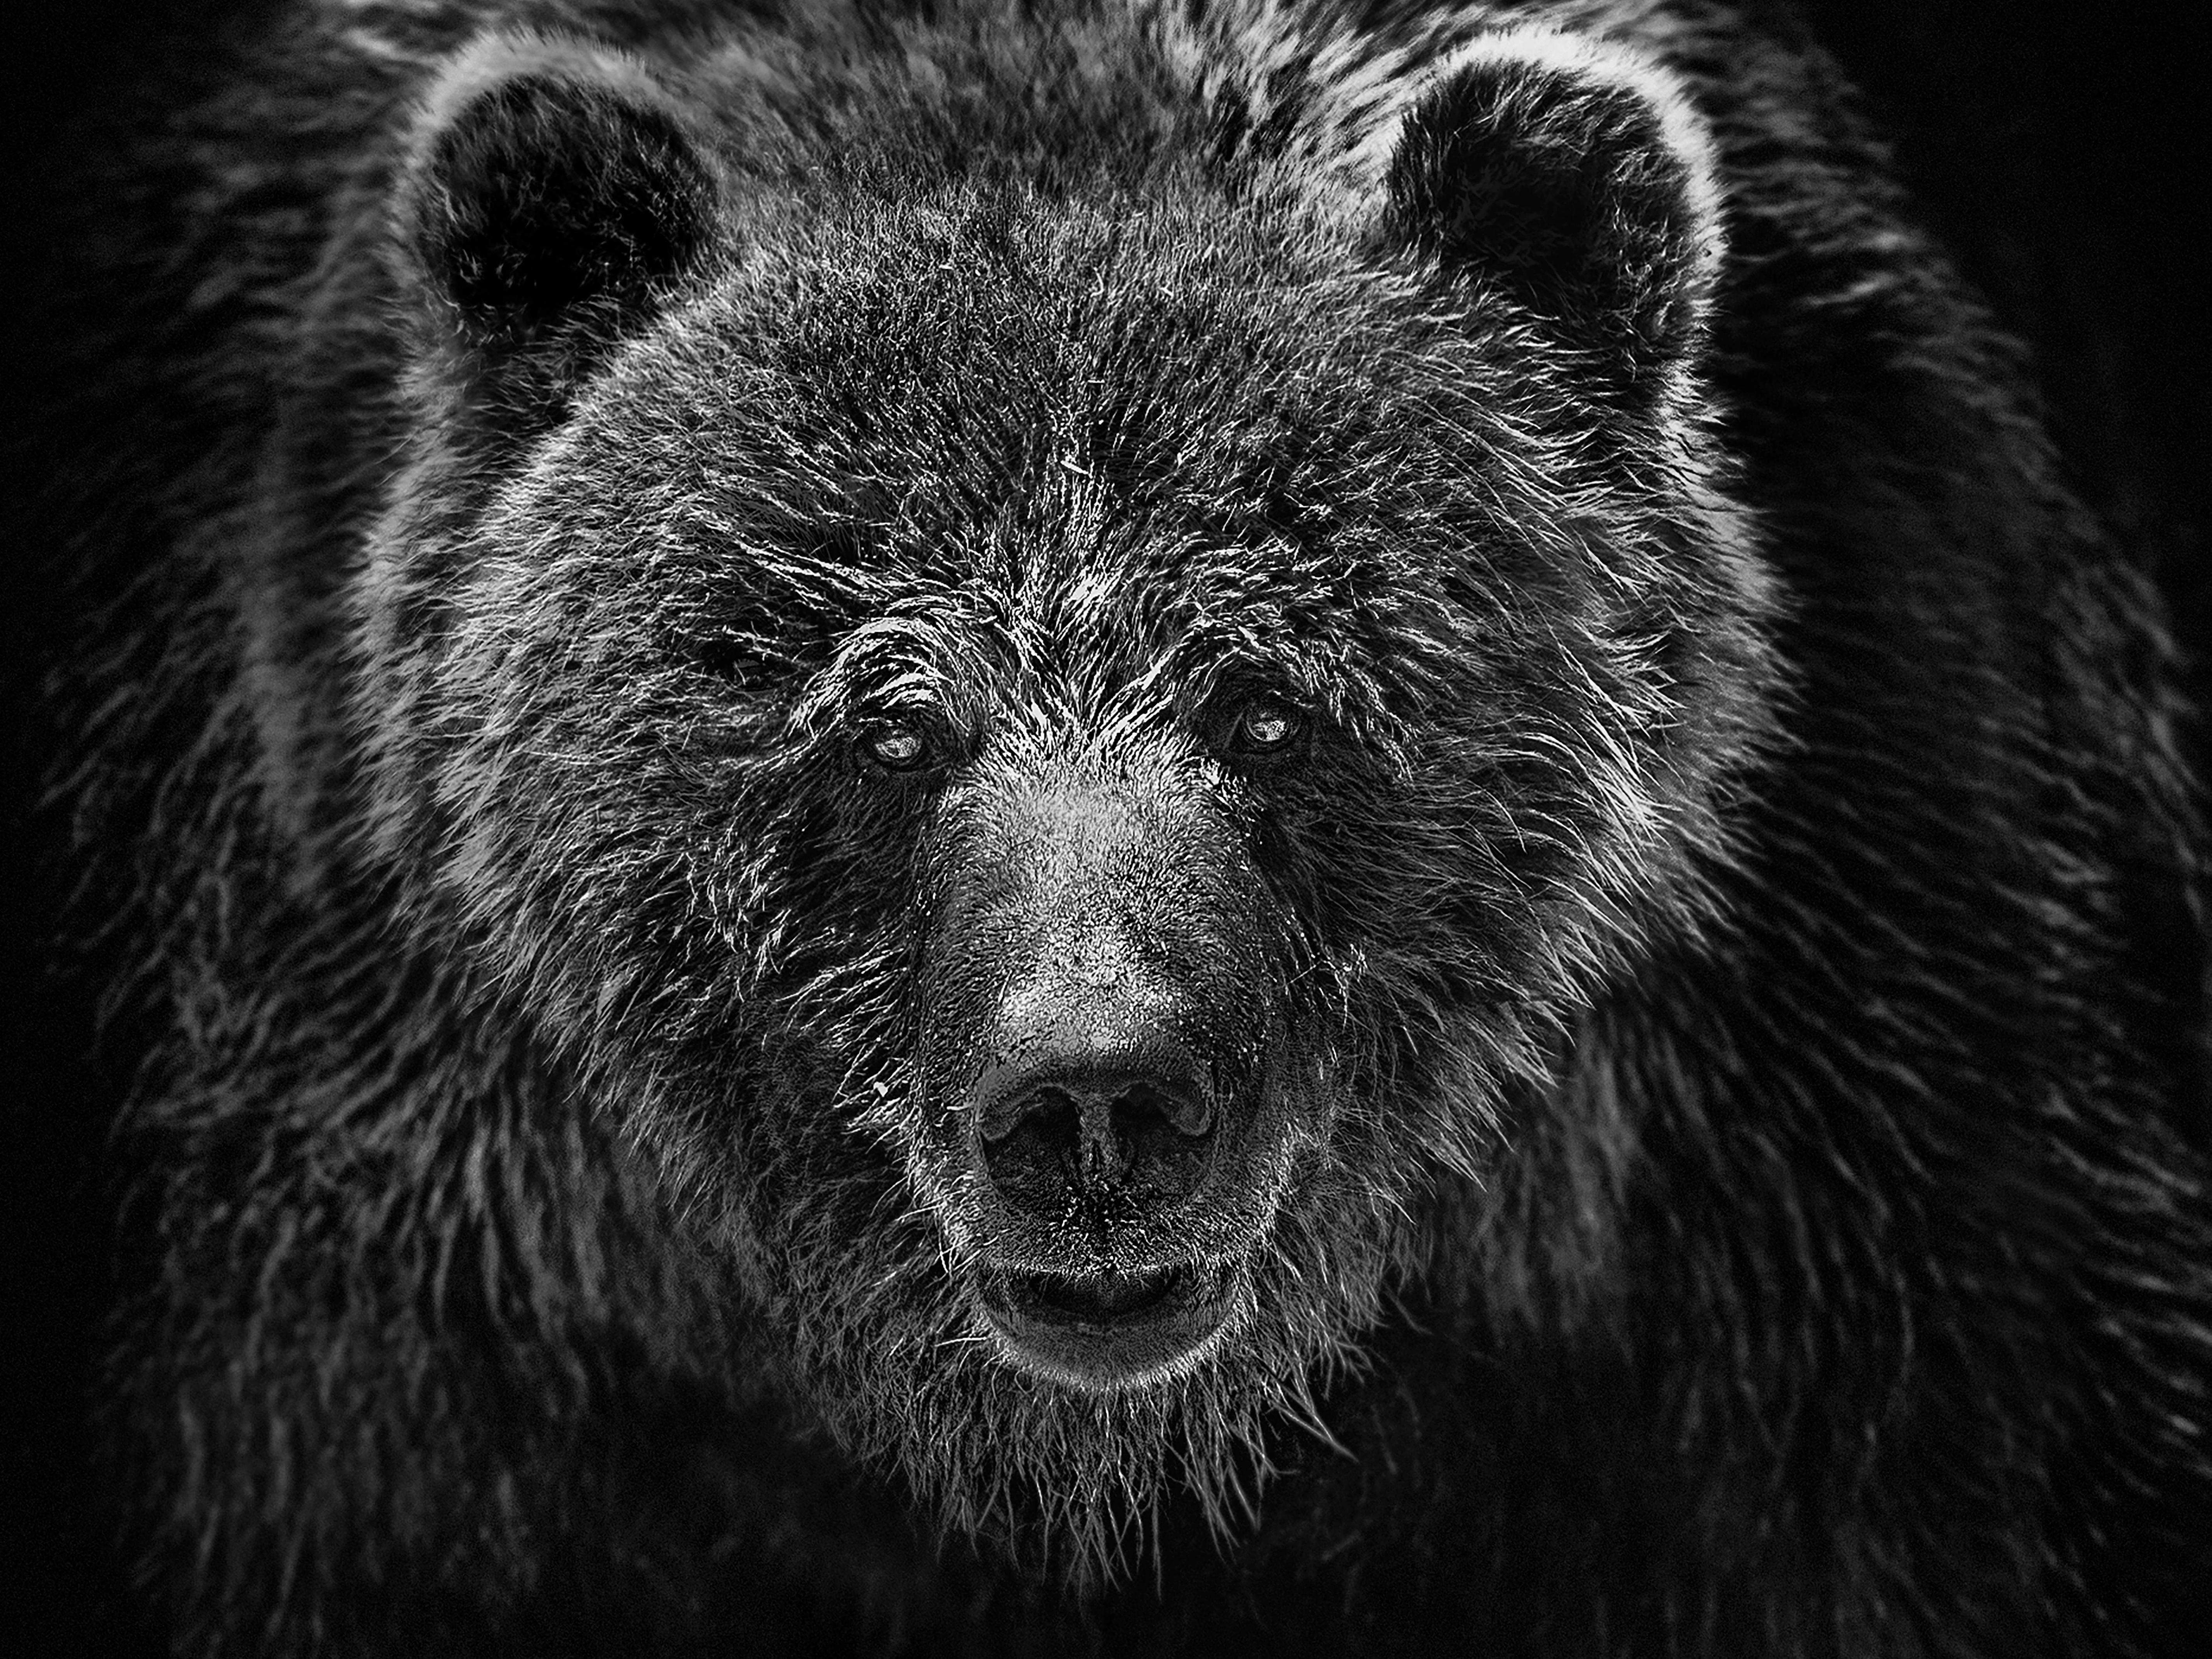 Shane Russeck Animal Print - "Grizzly Portrait" 60x40 - Black and White Photography Grizzly Bear Photograph